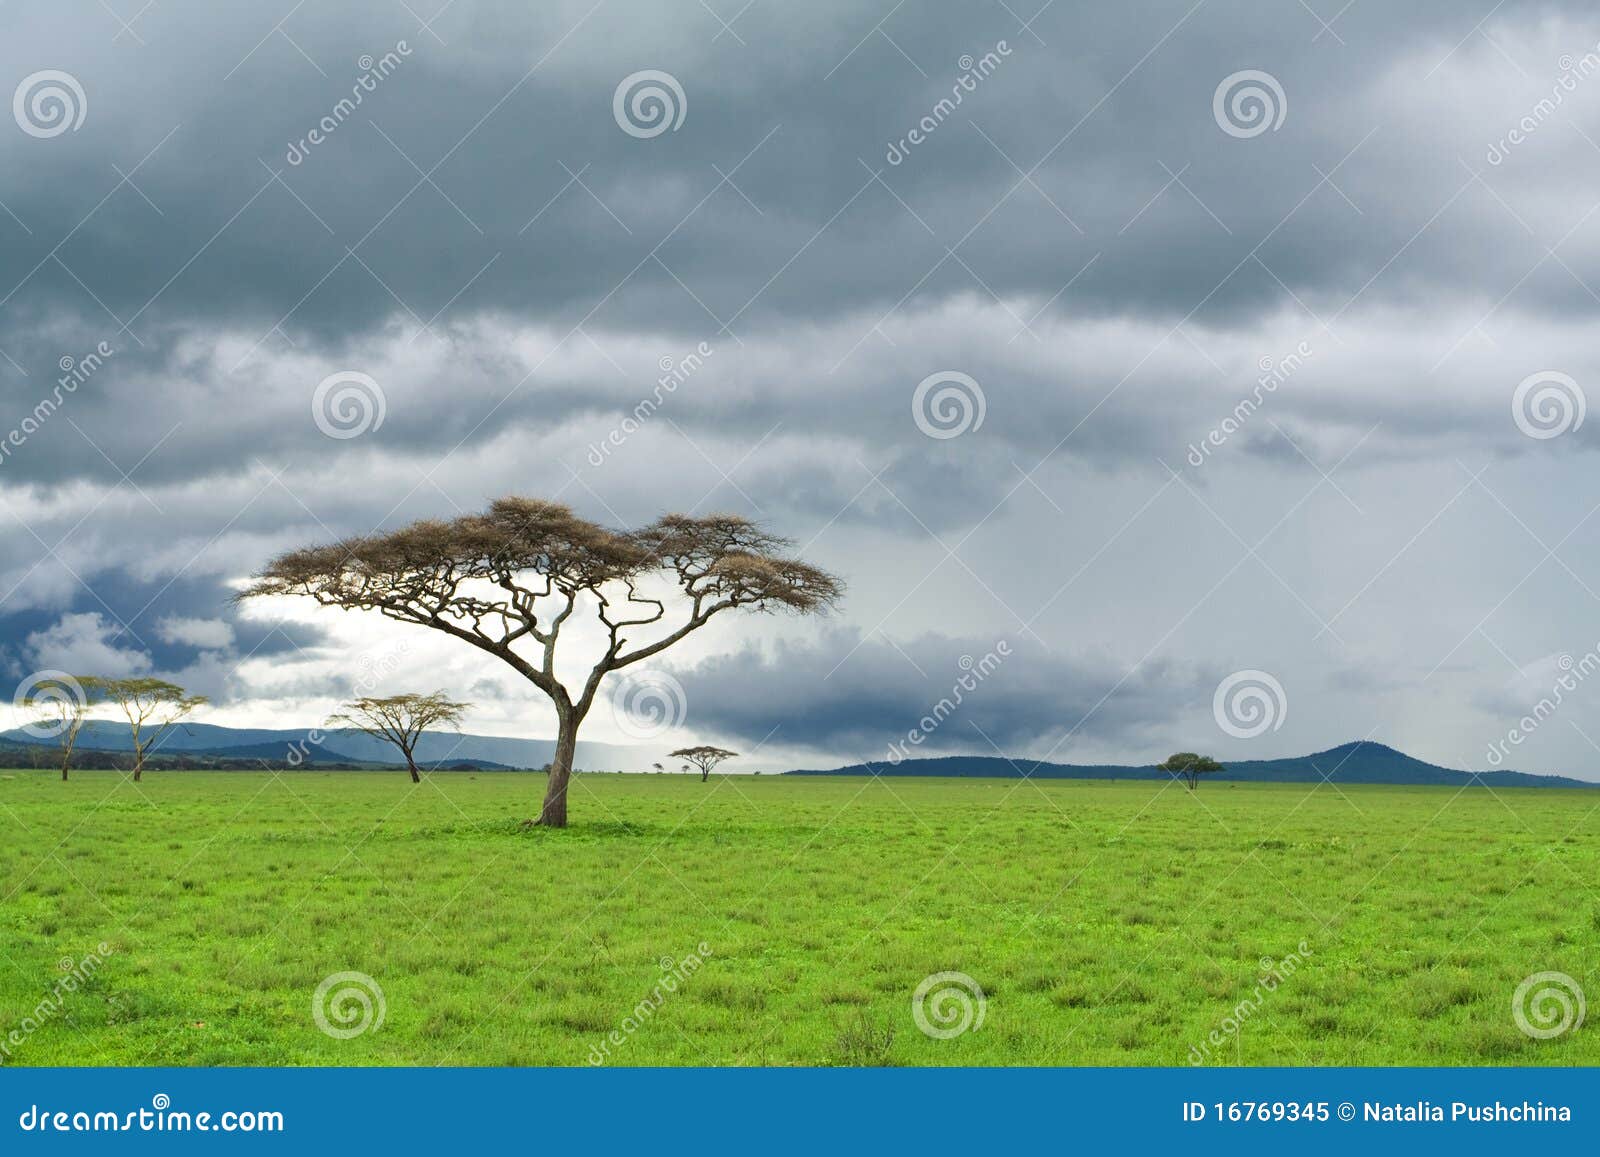 tree, green grassland, and storm cloud in savannah